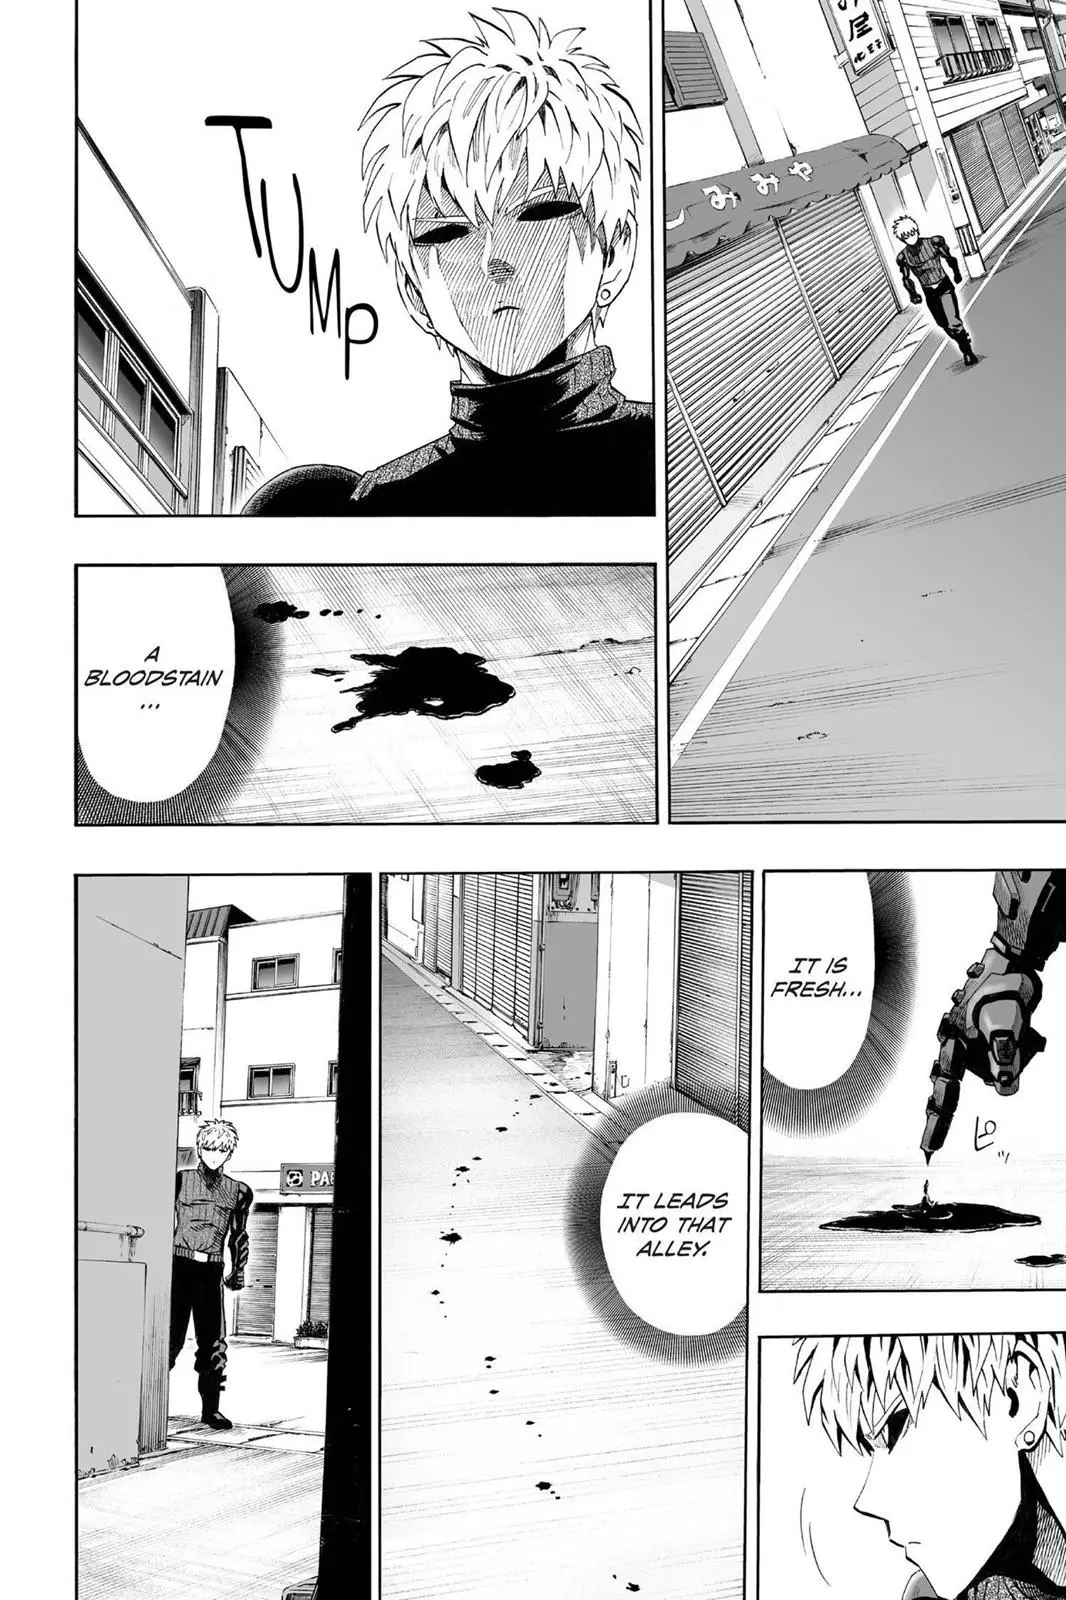 One Punch Man Chapter 40.5, READ One Punch Man Chapter 40.5 ONLINE, lost in the cloud genre,lost in the cloud gif,lost in the cloud girl,lost in the cloud goods,lost in the cloud goodreads,lost in the cloud,lost ark cloud gaming,lost odyssey cloud gaming,lost in the cloud fanart,lost in the cloud fanfic,lost in the cloud fandom,lost in the cloud first kiss,lost in the cloud font,lost in the cloud ending,lost in the cloud episode 97,lost in the cloud edit,lost in the cloud explained,lost in the cloud dog,lost in the cloud discord server,lost in the cloud desktop wallpaper,lost in the cloud drawing,can't find my cloud on network,lost in the cloud characters,lost in the cloud chapter 93 release date,lost in the cloud birthday,lost in the cloud birthday art,lost in the cloud background,lost in the cloud banner,lost in the clouds meaning,what is the black cloud in lost,lost in the cloud ao3,lost in the cloud anime,lost in the cloud art,lost in the cloud author twitter,lost in the cloud author instagram,lost in the cloud artist,lost in the cloud acrylic stand,lost in the cloud artist twitter,lost in the cloud art style,lost in the cloud analysis